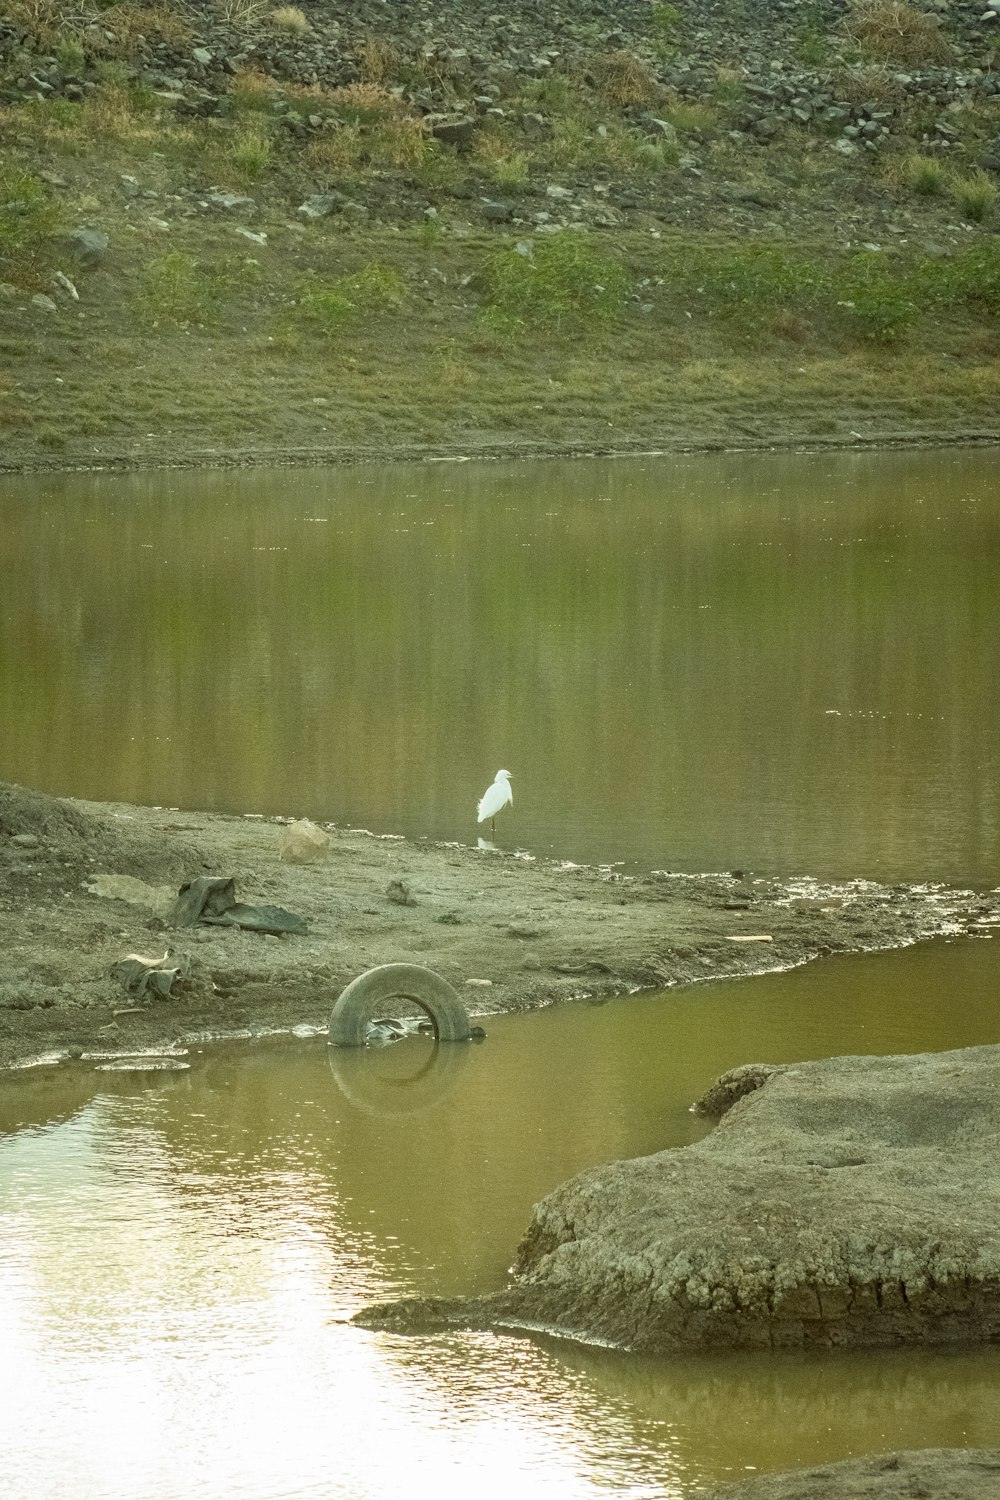 a bird is standing on the edge of a body of water